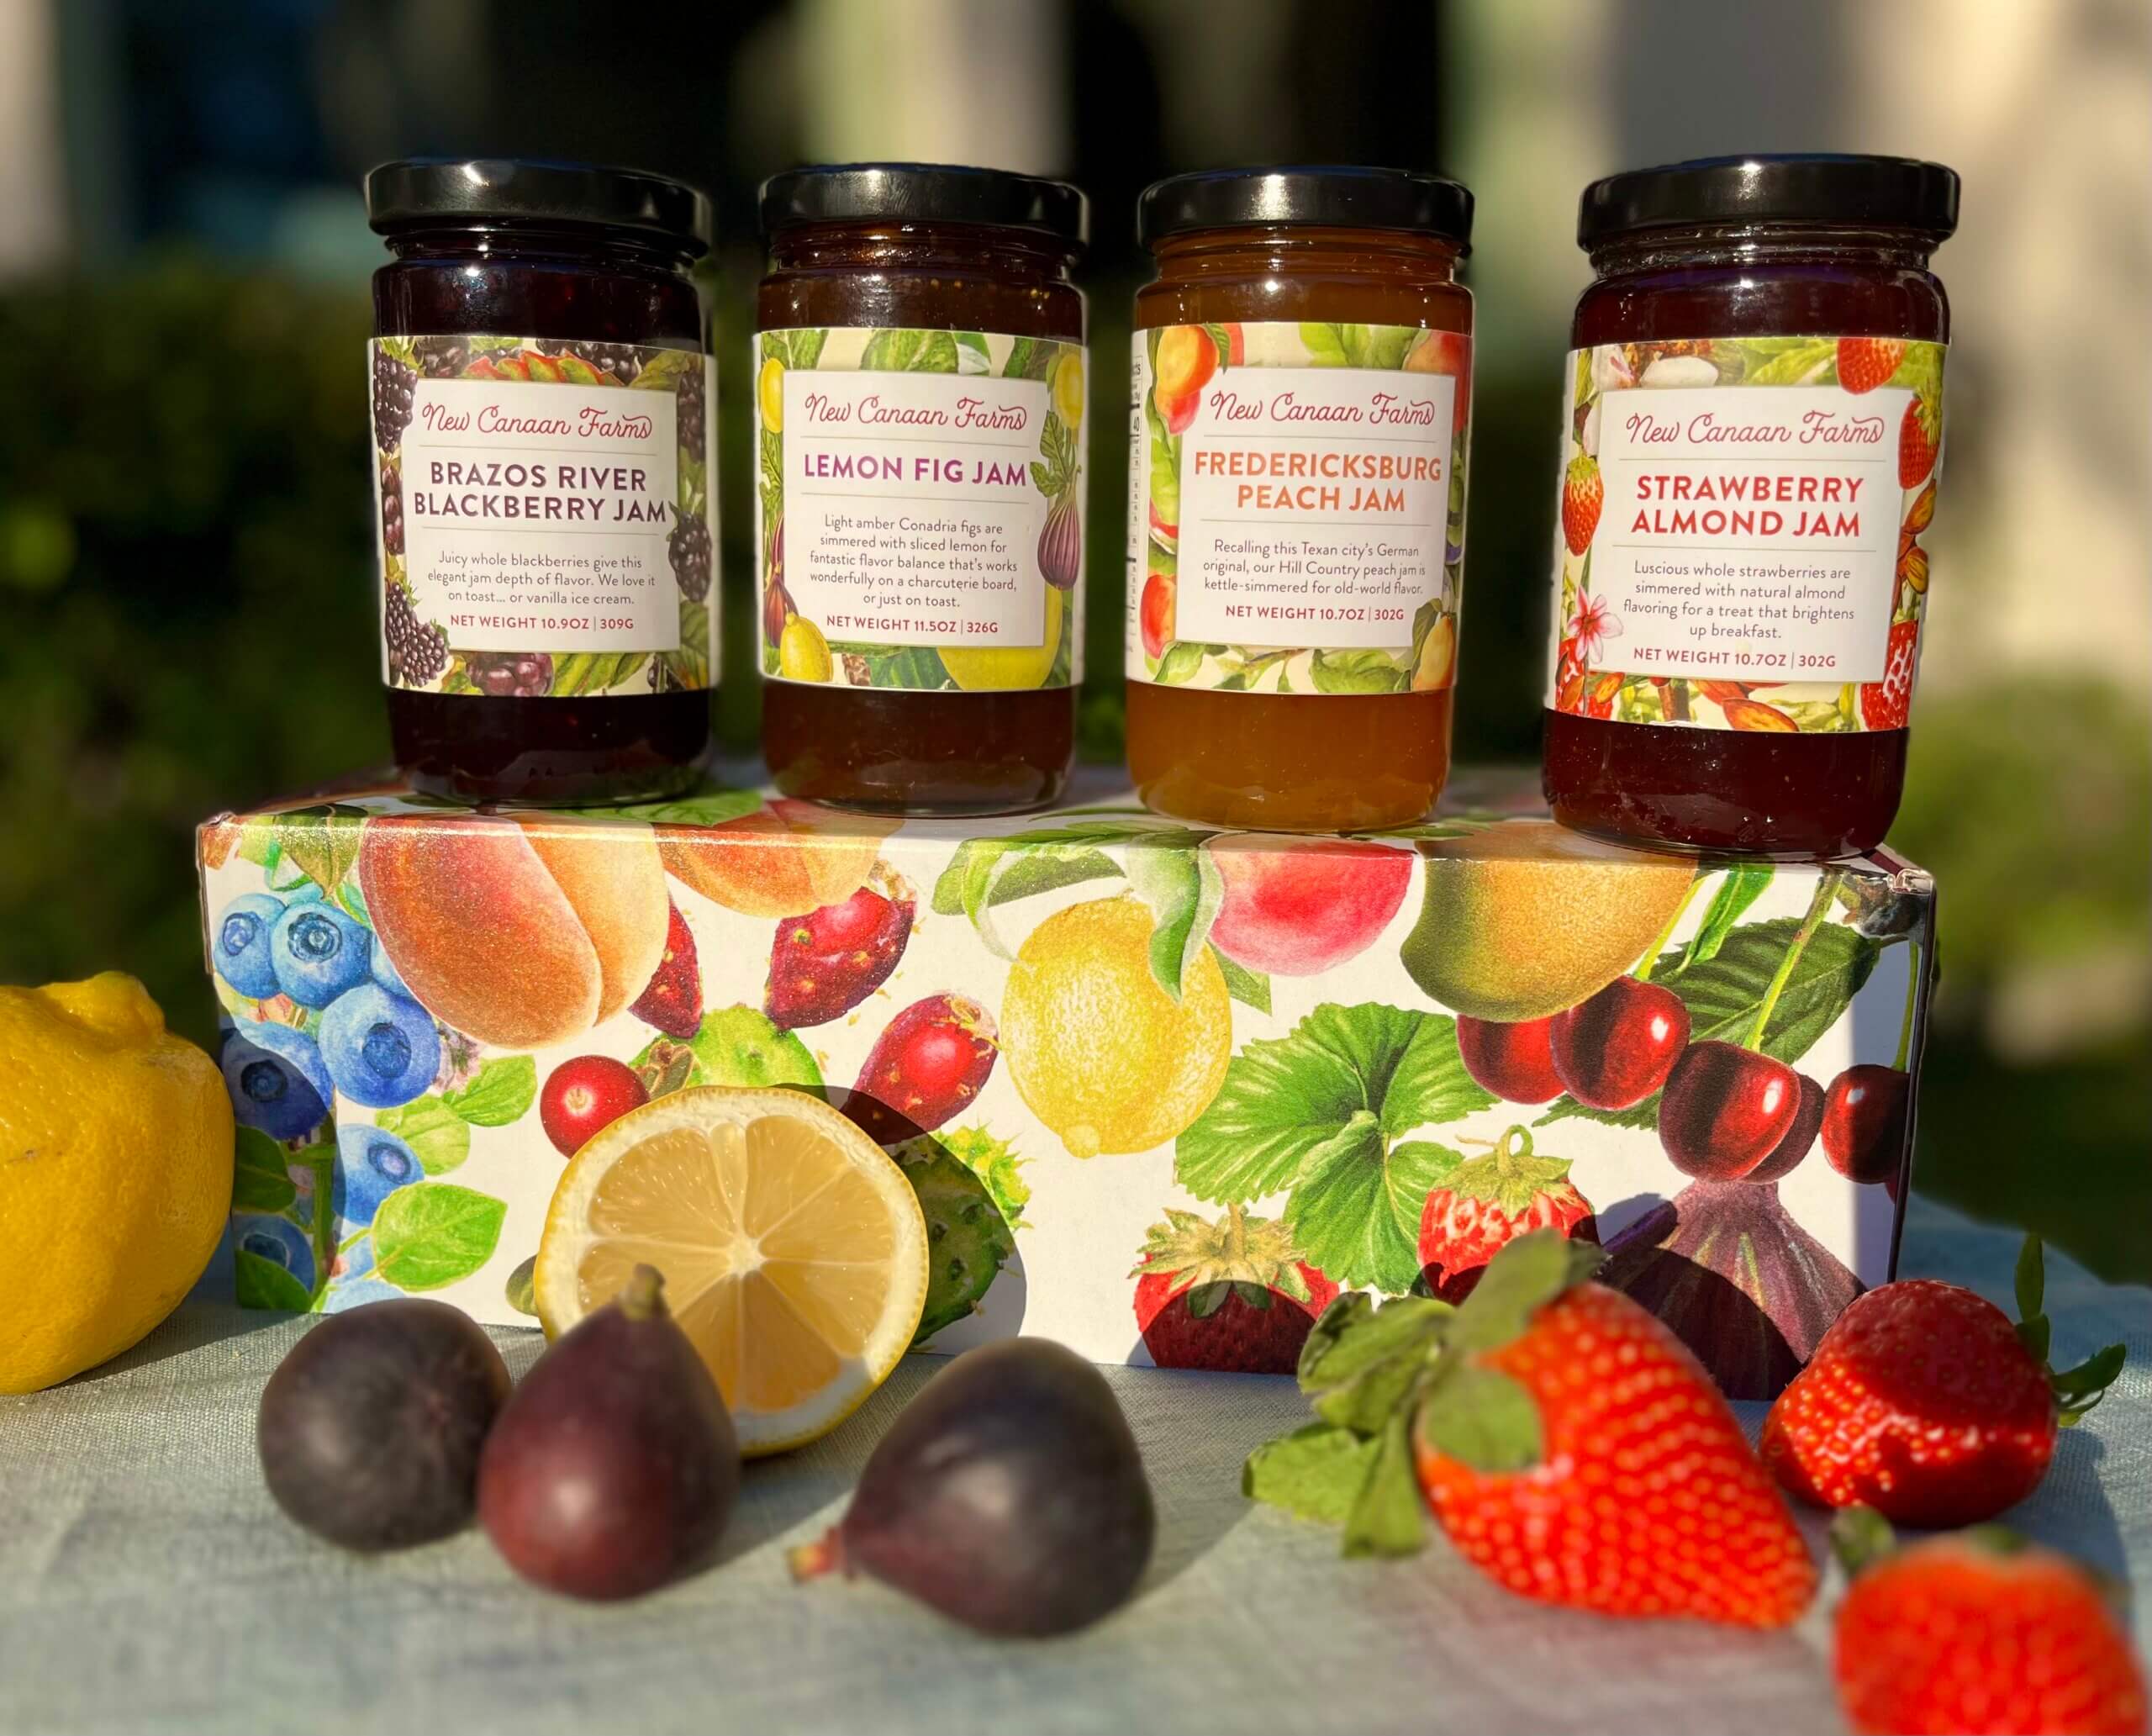 Four New Canaan Farms customer favorite jams on top of a gift box with scattered fruit around them; Blackberry, Lemon Fig, Peach and Strawberry Almond